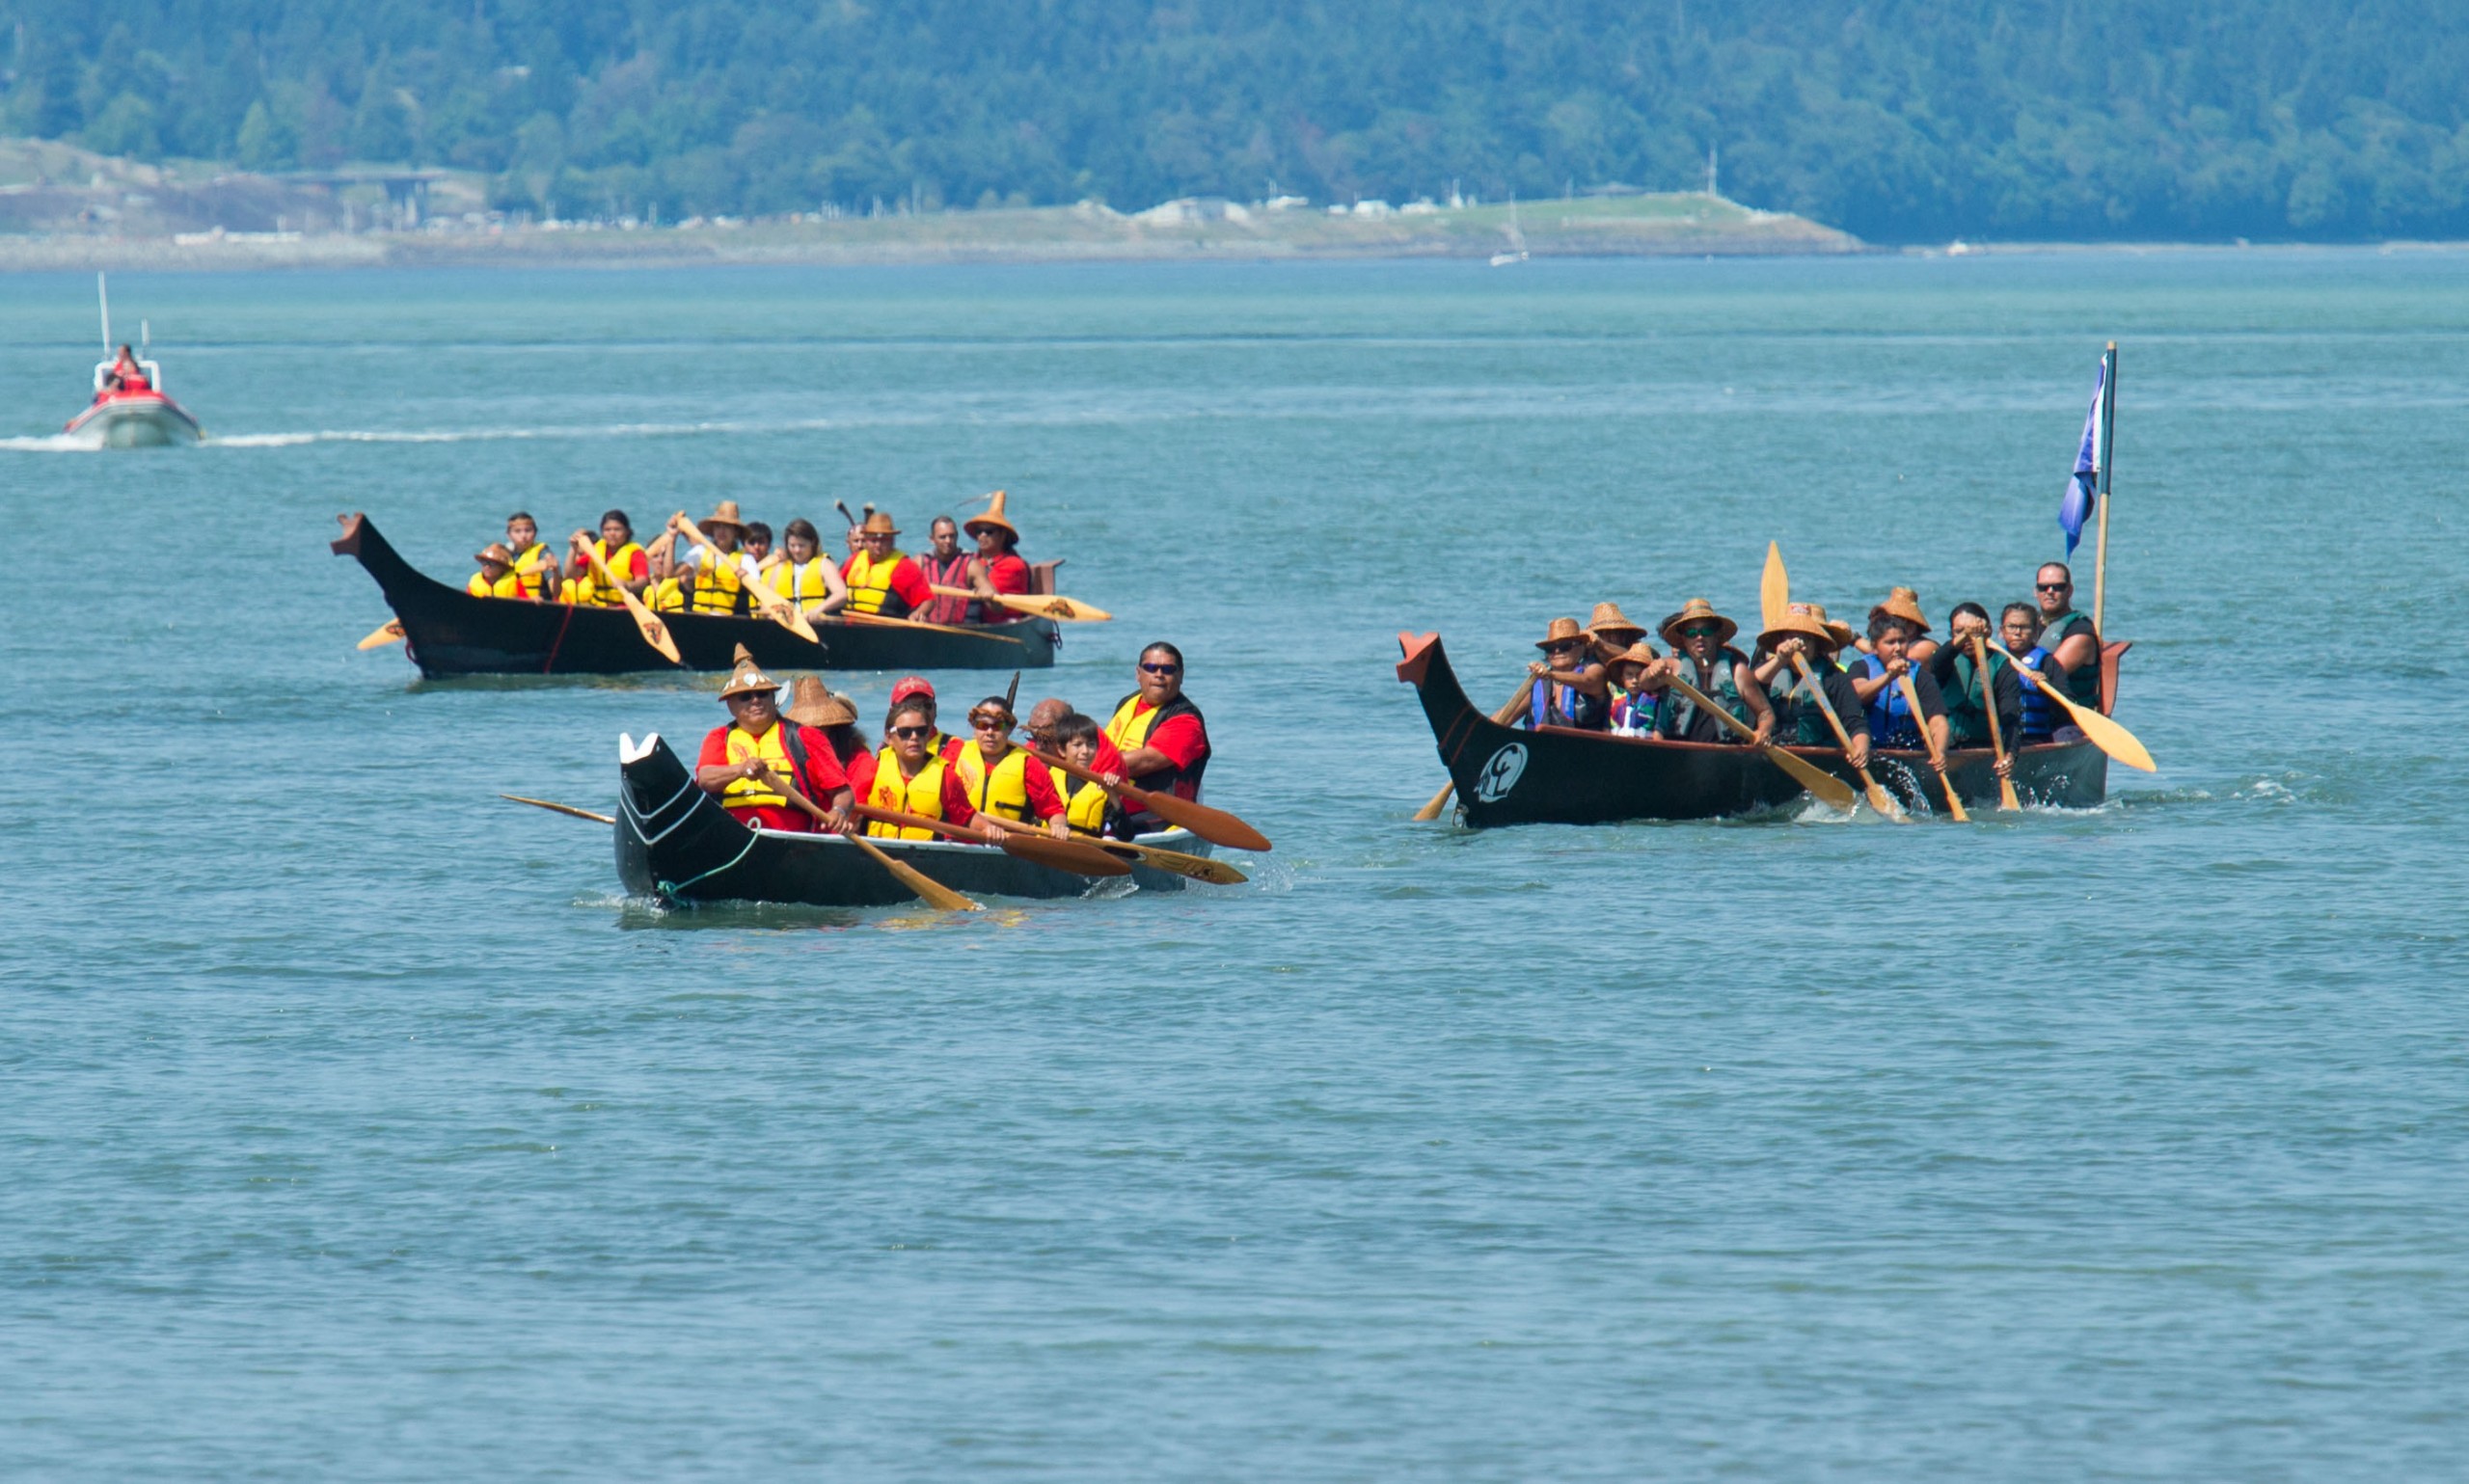 Power Paddle to Puyallup, the annual Native American traditional canoe gathering that takes place along the west coast of Washington and Canada, this year hosted by the Puyallup Tribe, Saturday, July 28, 2018. (Photo by John Froschauer/PLU)